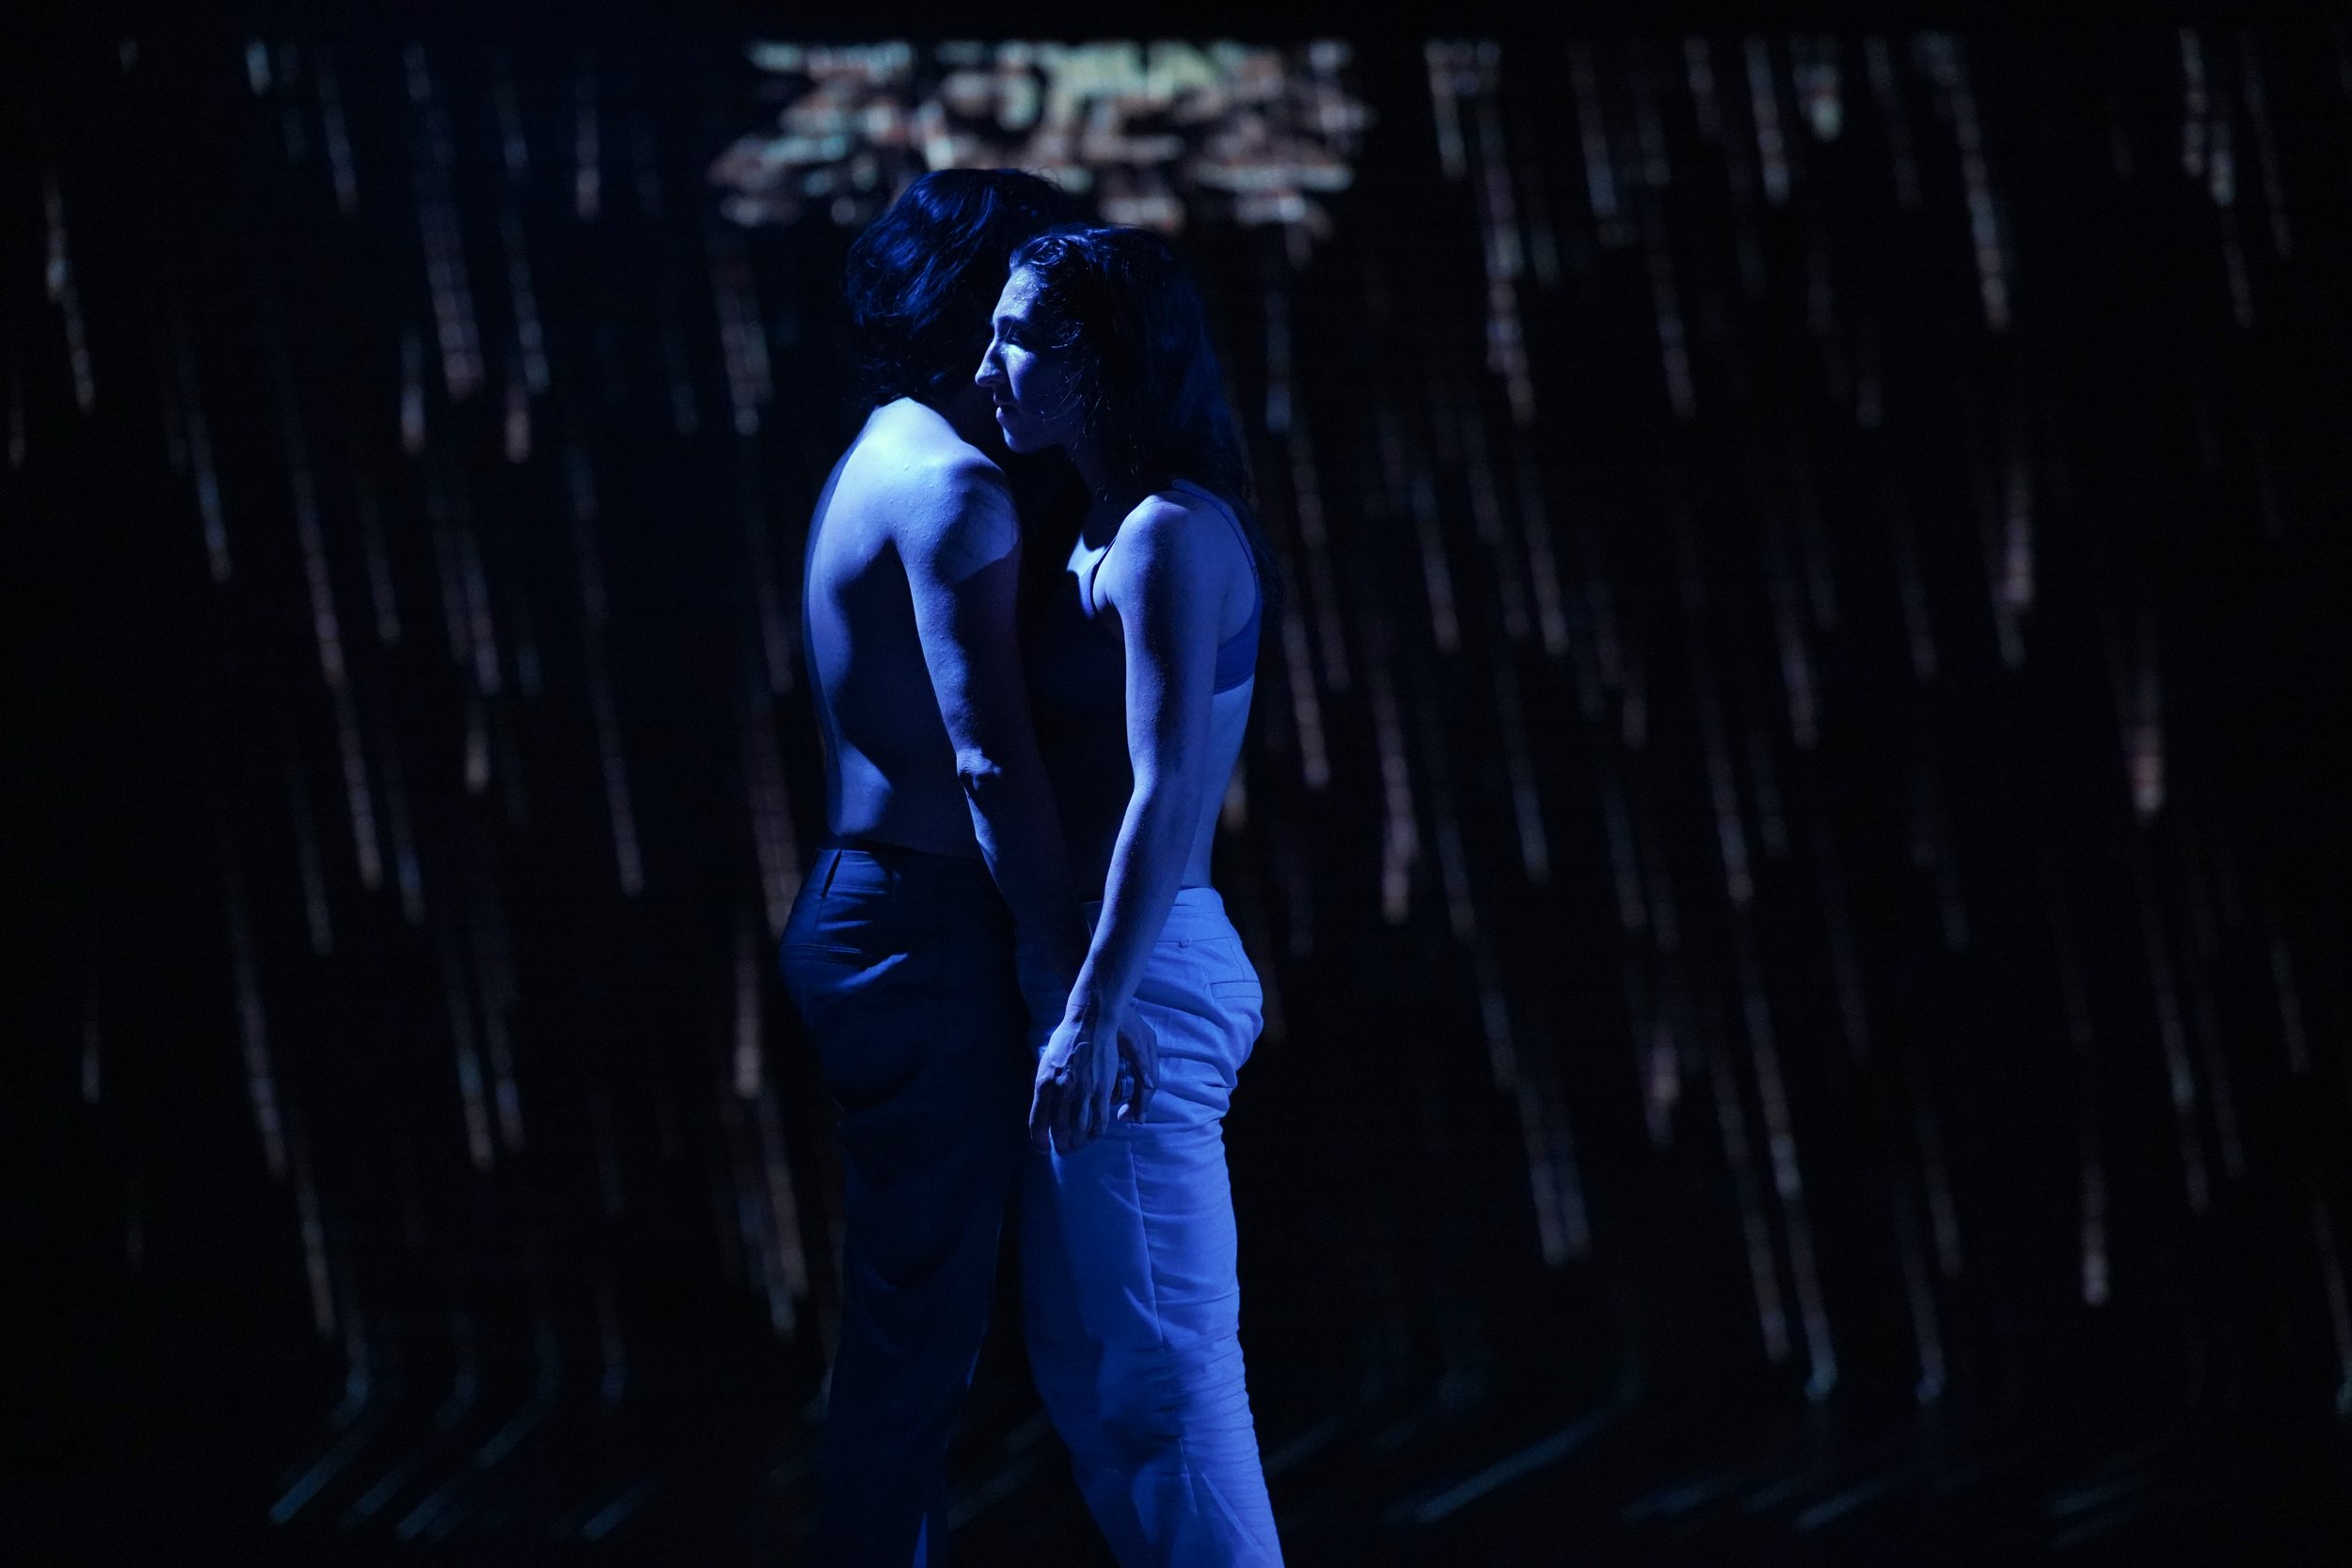 Mateo and Katherine stand shirtless with their  bodies almost touching.